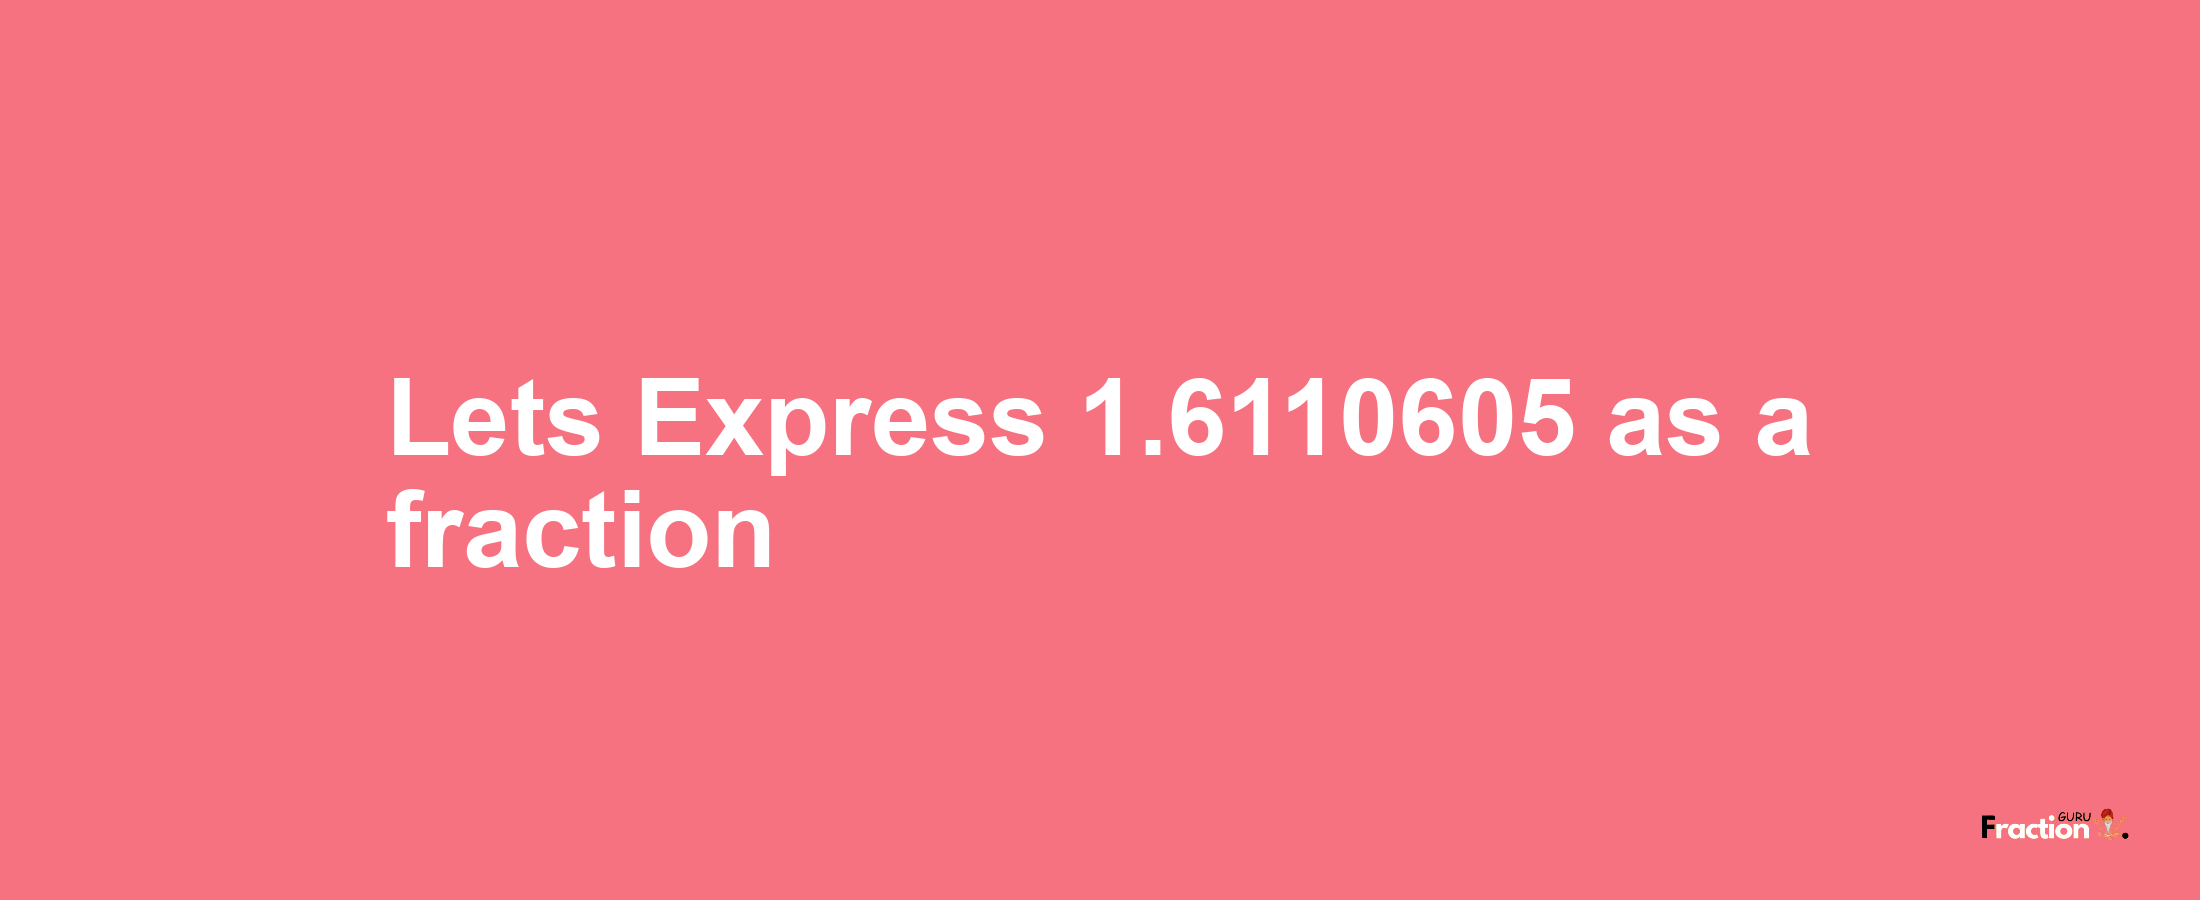 Lets Express 1.6110605 as afraction